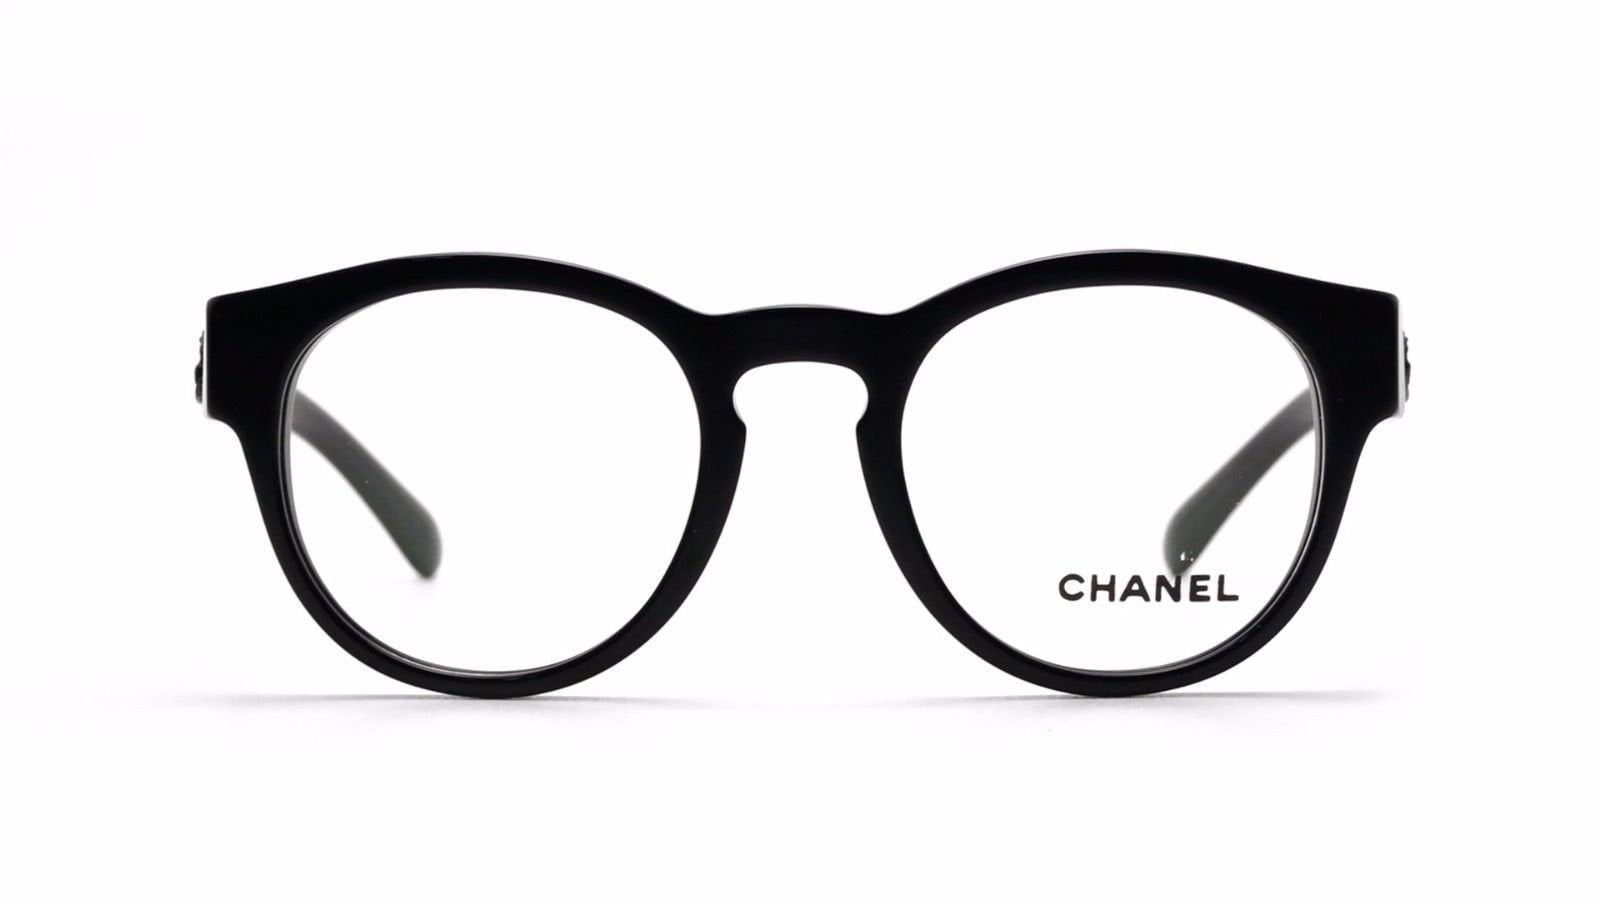 CHANEL 3343 c.1566 Women's Clear Brown Square Eyeglasses 52-17 140 NEW Rare